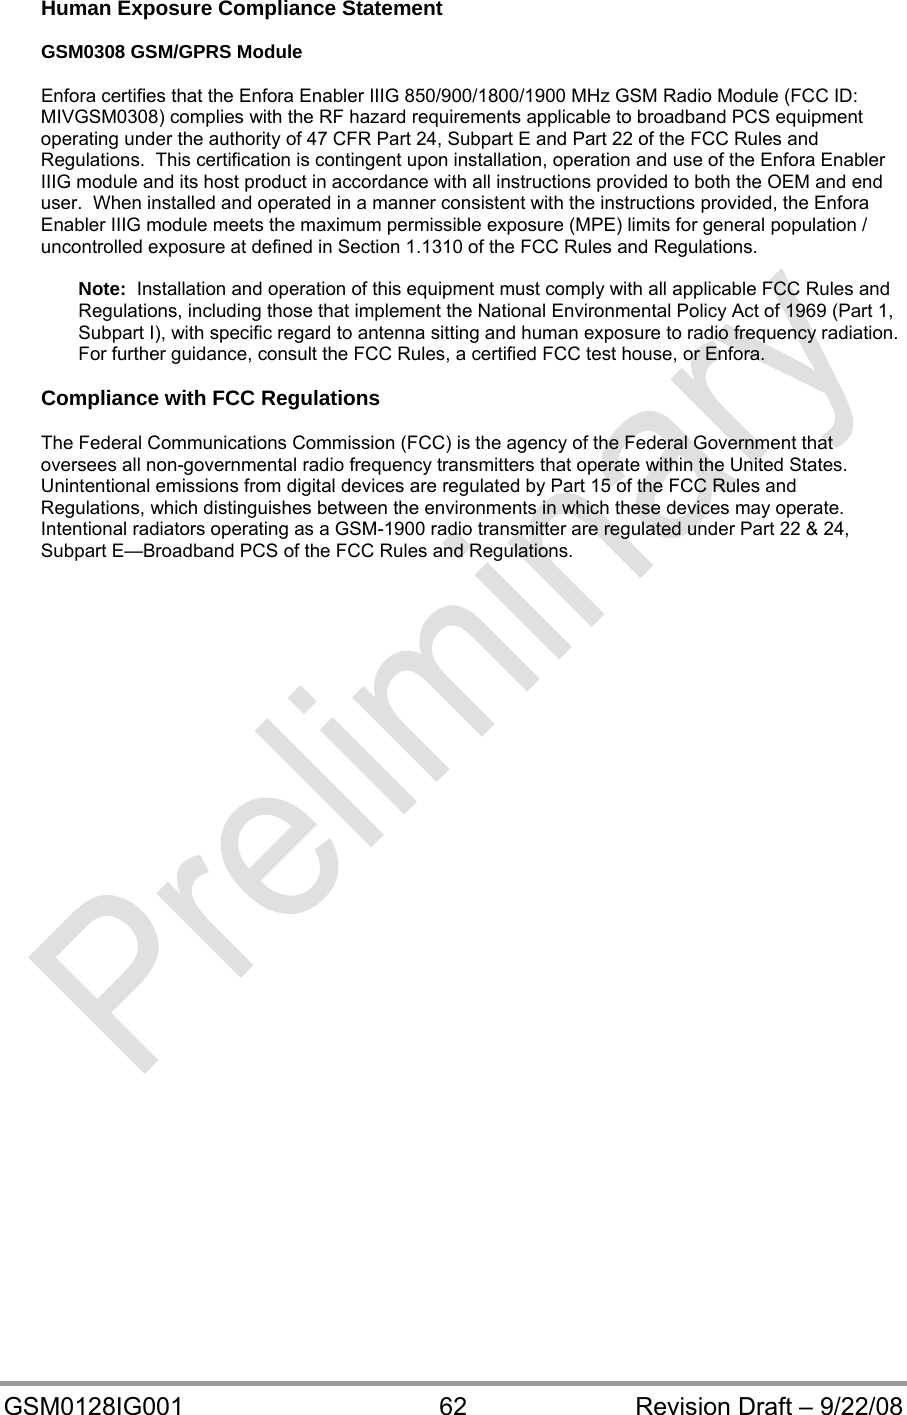  GSM0128IG001  62  Revision Draft – 9/22/08 Human Exposure Compliance Statement  GSM0308 GSM/GPRS Module  Enfora certifies that the Enfora Enabler IIIG 850/900/1800/1900 MHz GSM Radio Module (FCC ID: MIVGSM0308) complies with the RF hazard requirements applicable to broadband PCS equipment operating under the authority of 47 CFR Part 24, Subpart E and Part 22 of the FCC Rules and Regulations.  This certification is contingent upon installation, operation and use of the Enfora Enabler IIIG module and its host product in accordance with all instructions provided to both the OEM and end user.  When installed and operated in a manner consistent with the instructions provided, the Enfora Enabler IIIG module meets the maximum permissible exposure (MPE) limits for general population / uncontrolled exposure at defined in Section 1.1310 of the FCC Rules and Regulations.  Note:  Installation and operation of this equipment must comply with all applicable FCC Rules and Regulations, including those that implement the National Environmental Policy Act of 1969 (Part 1, Subpart I), with specific regard to antenna sitting and human exposure to radio frequency radiation.  For further guidance, consult the FCC Rules, a certified FCC test house, or Enfora.  Compliance with FCC Regulations  The Federal Communications Commission (FCC) is the agency of the Federal Government that oversees all non-governmental radio frequency transmitters that operate within the United States.  Unintentional emissions from digital devices are regulated by Part 15 of the FCC Rules and Regulations, which distinguishes between the environments in which these devices may operate.  Intentional radiators operating as a GSM-1900 radio transmitter are regulated under Part 22 &amp; 24, Subpart E—Broadband PCS of the FCC Rules and Regulations.  